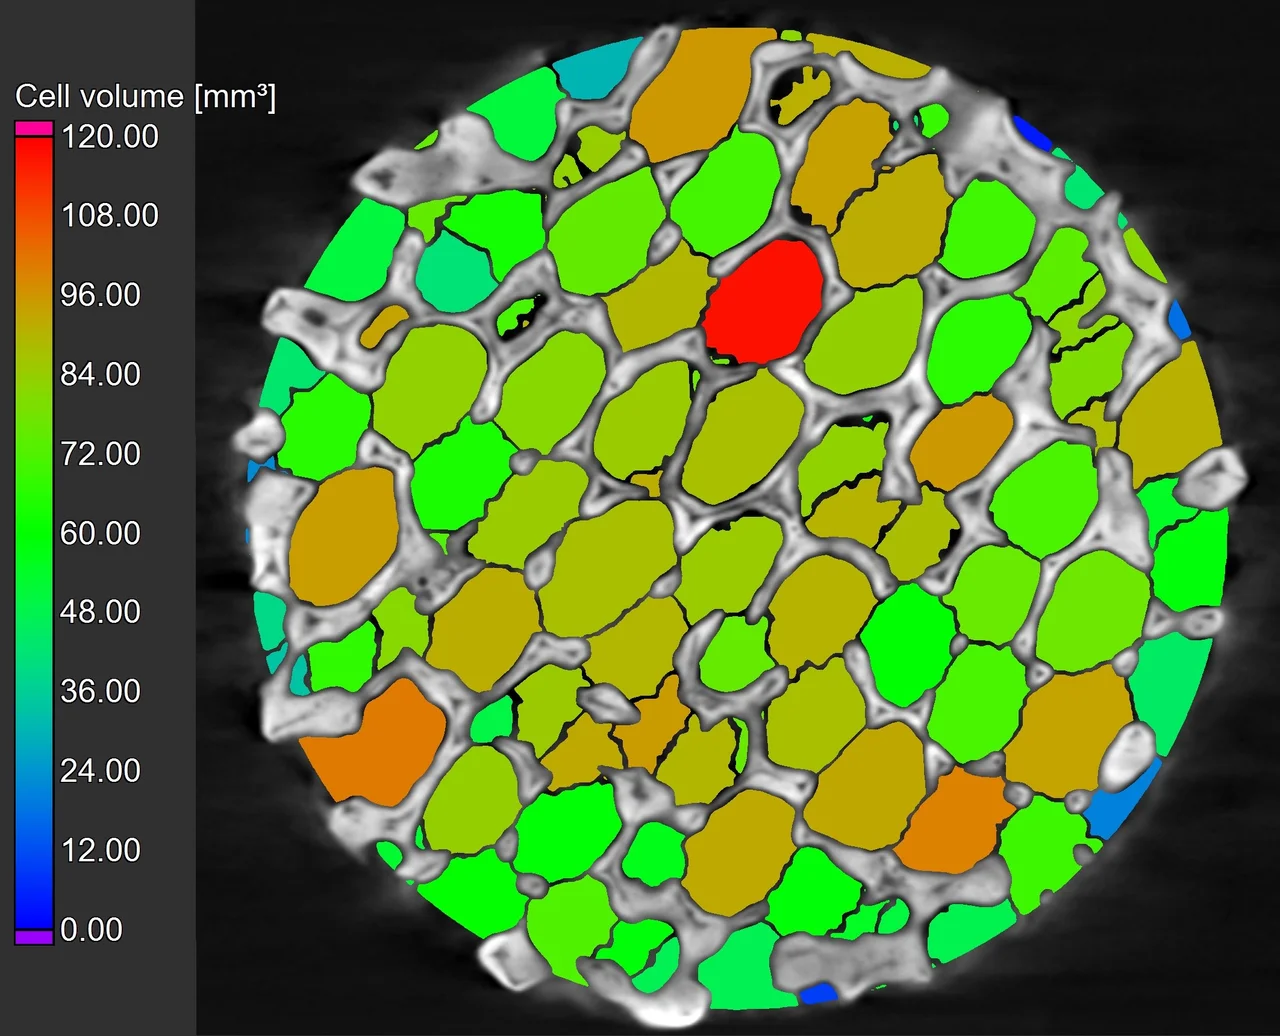 Foam/powder analysis results with color-coded cell volume; most cells are green (between 60 and 84 cubic millimeters), with a couple outliers (red and blue)